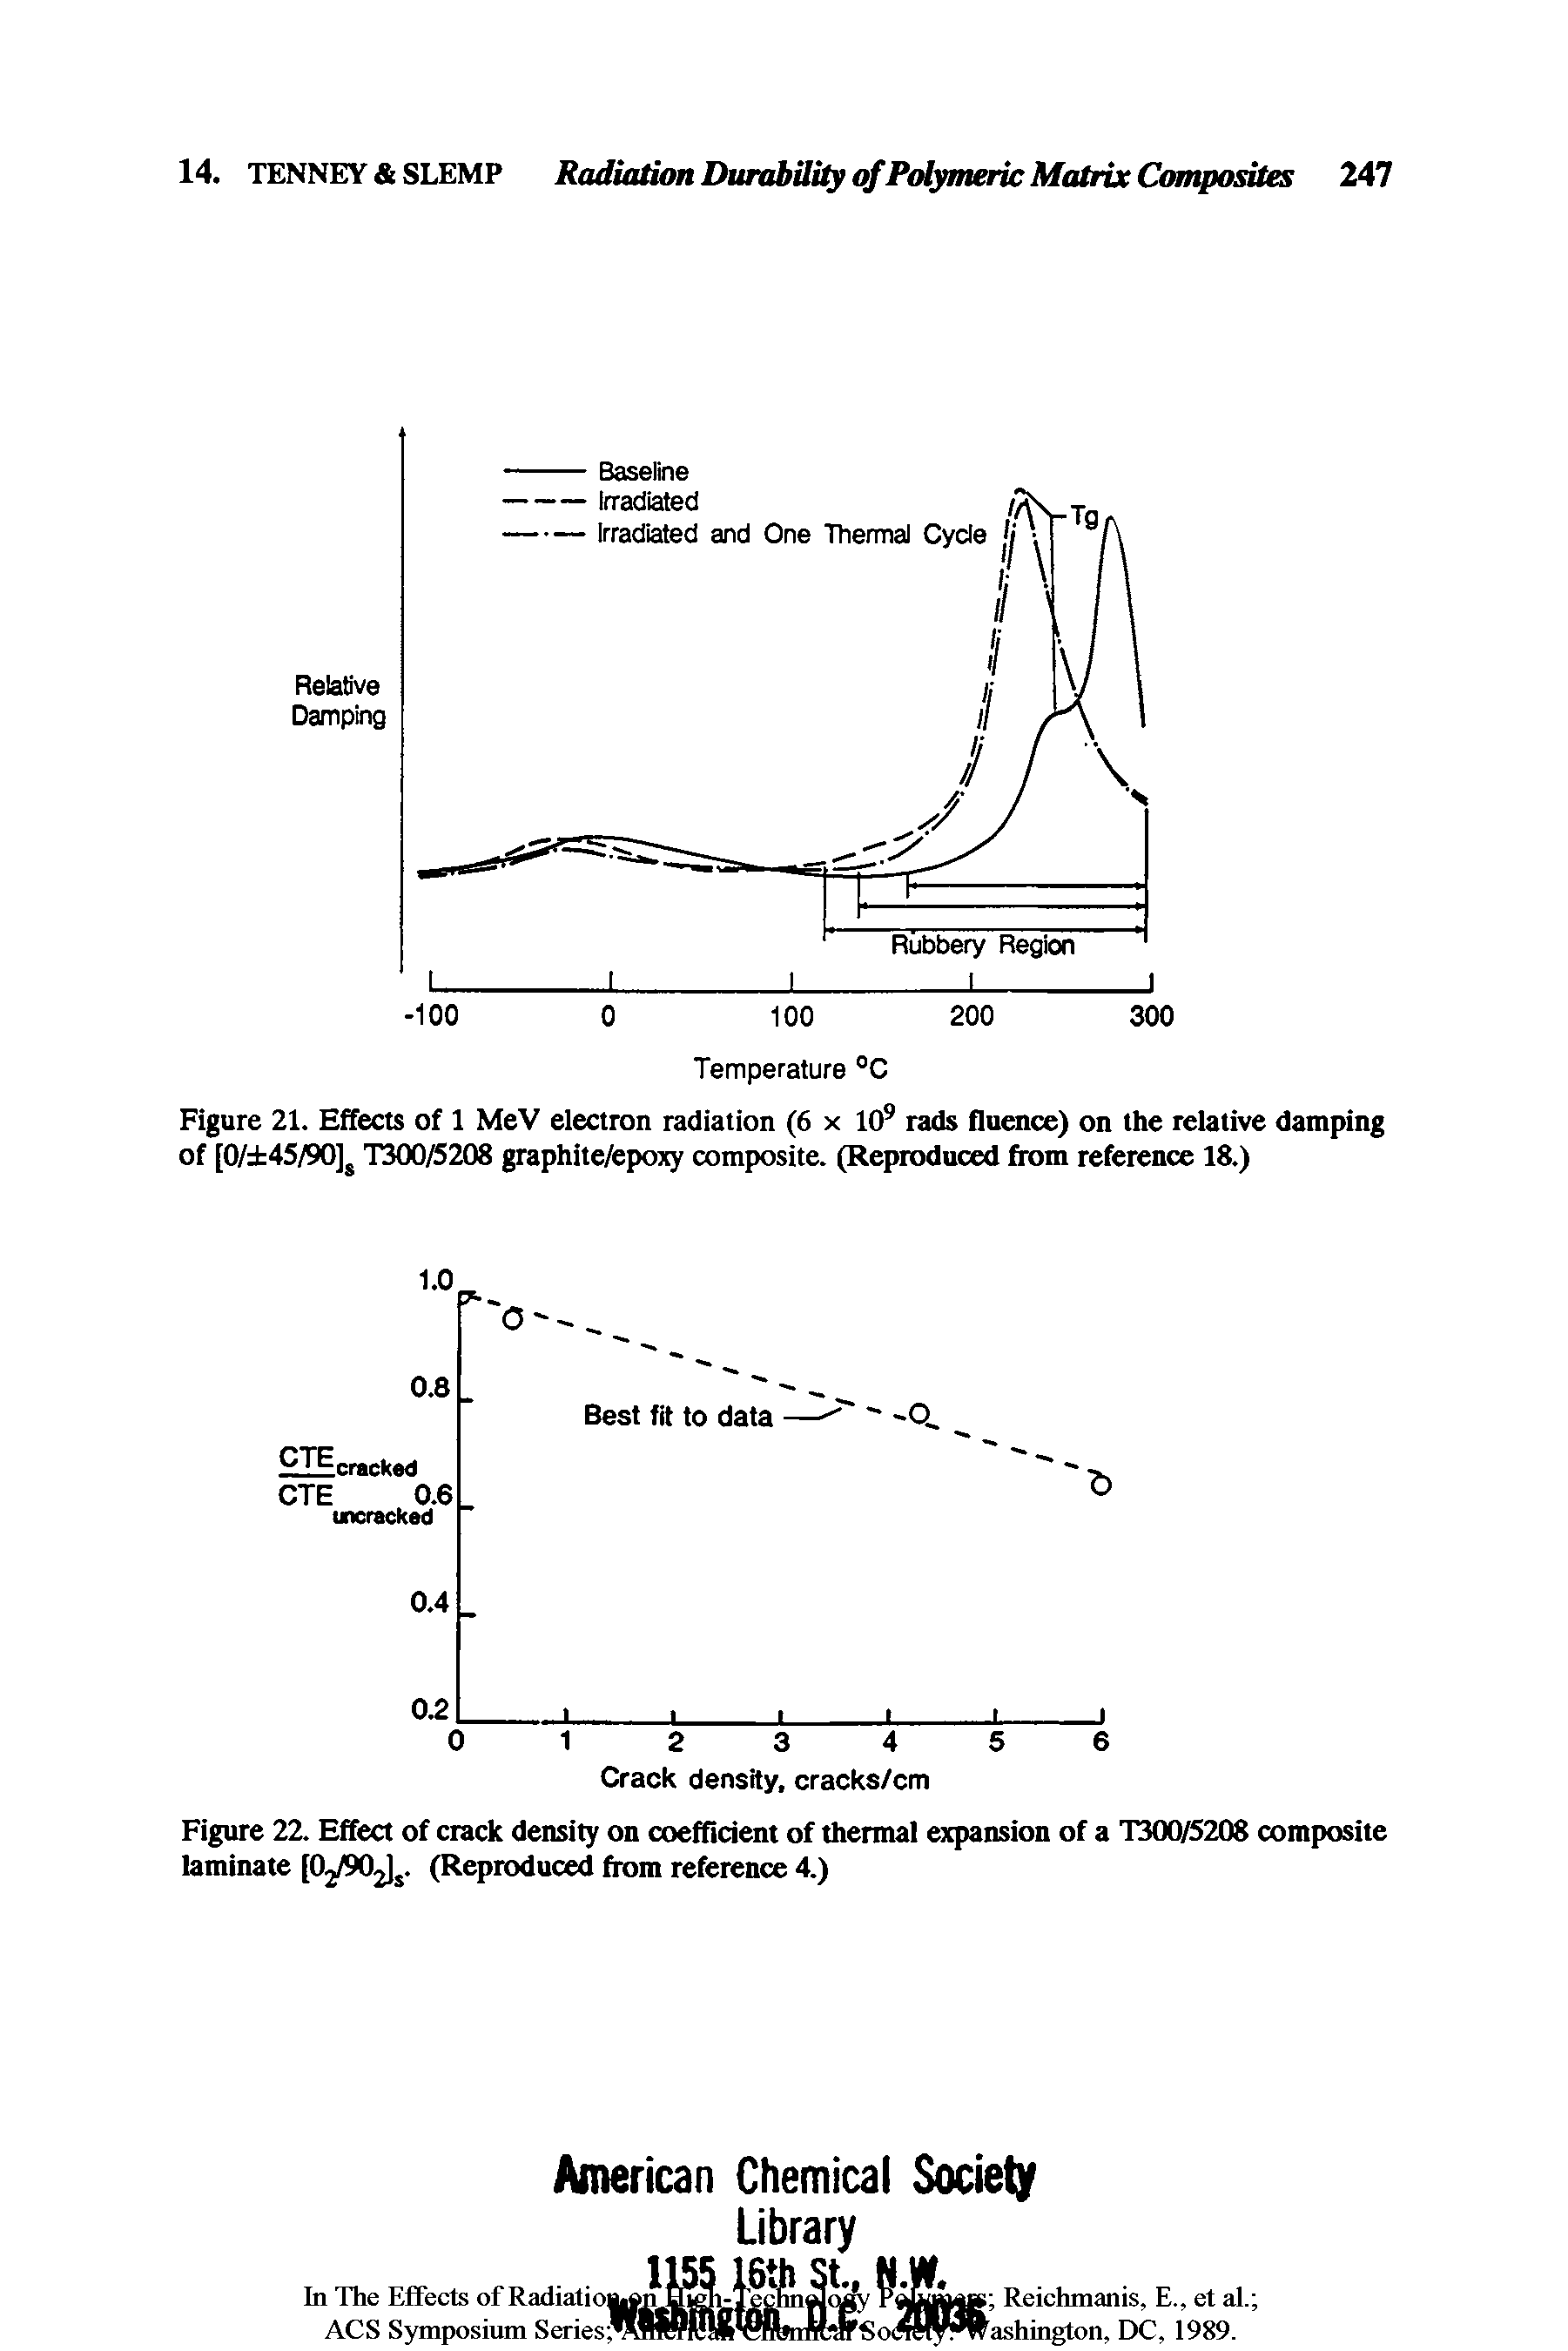 Figure 22. Effect of crack density on coefficient of thermal expansion of a T300/5208 composite laminate [OjAWJj. (Reproduced from reference 4.)...